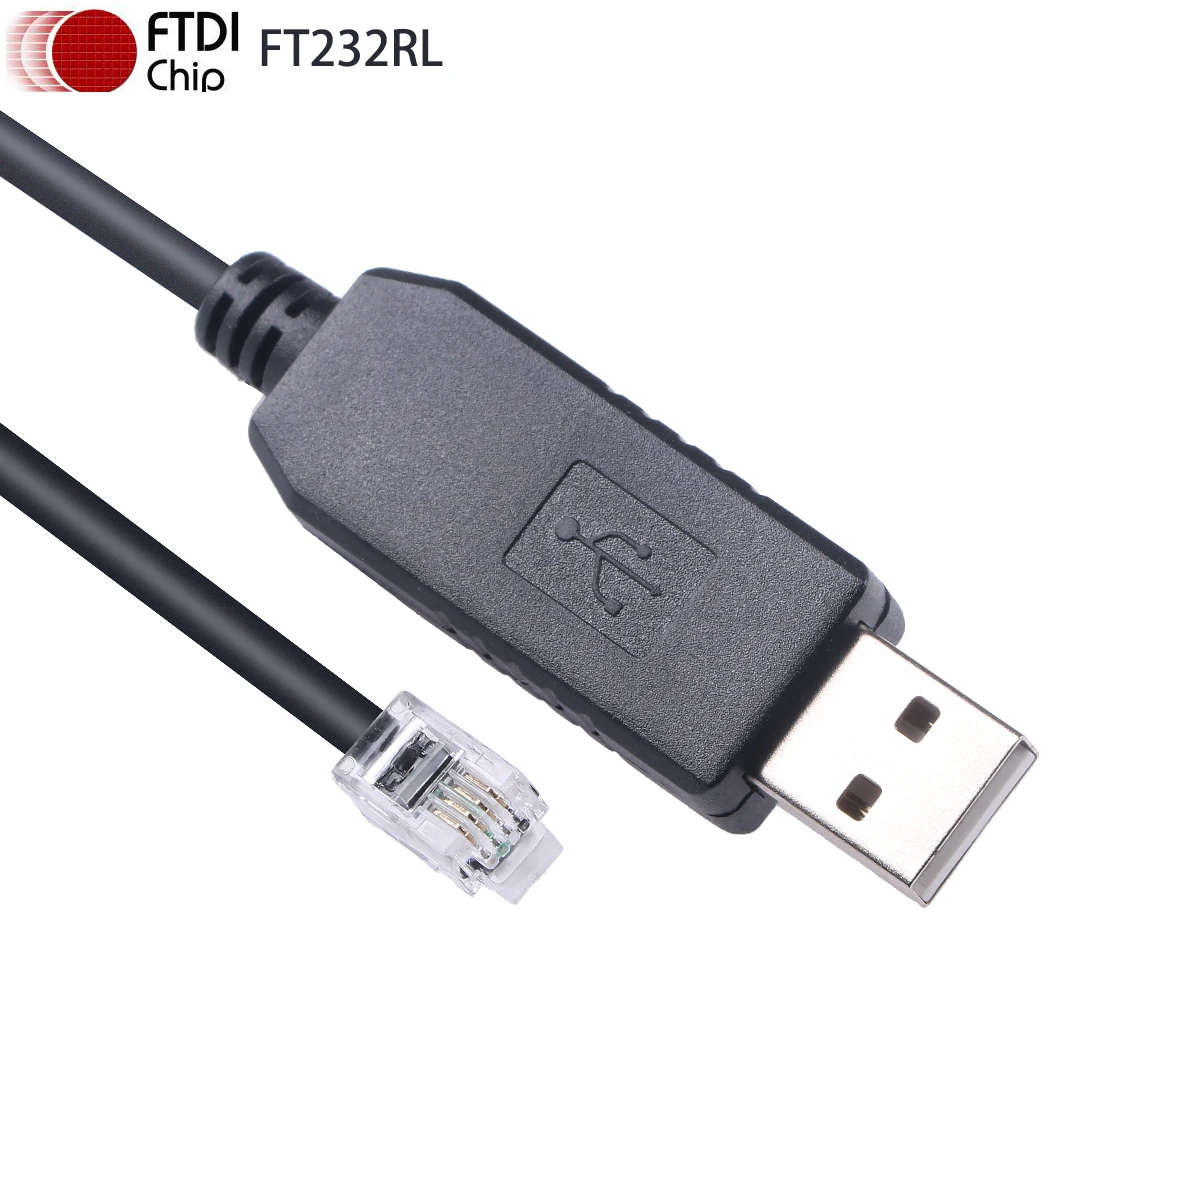 FTDI FT232RL USB to RJ9 4P4C RS232 Serial Cable for Meade 505 Telescope Autostar Controller ETX90 70 Hand Control